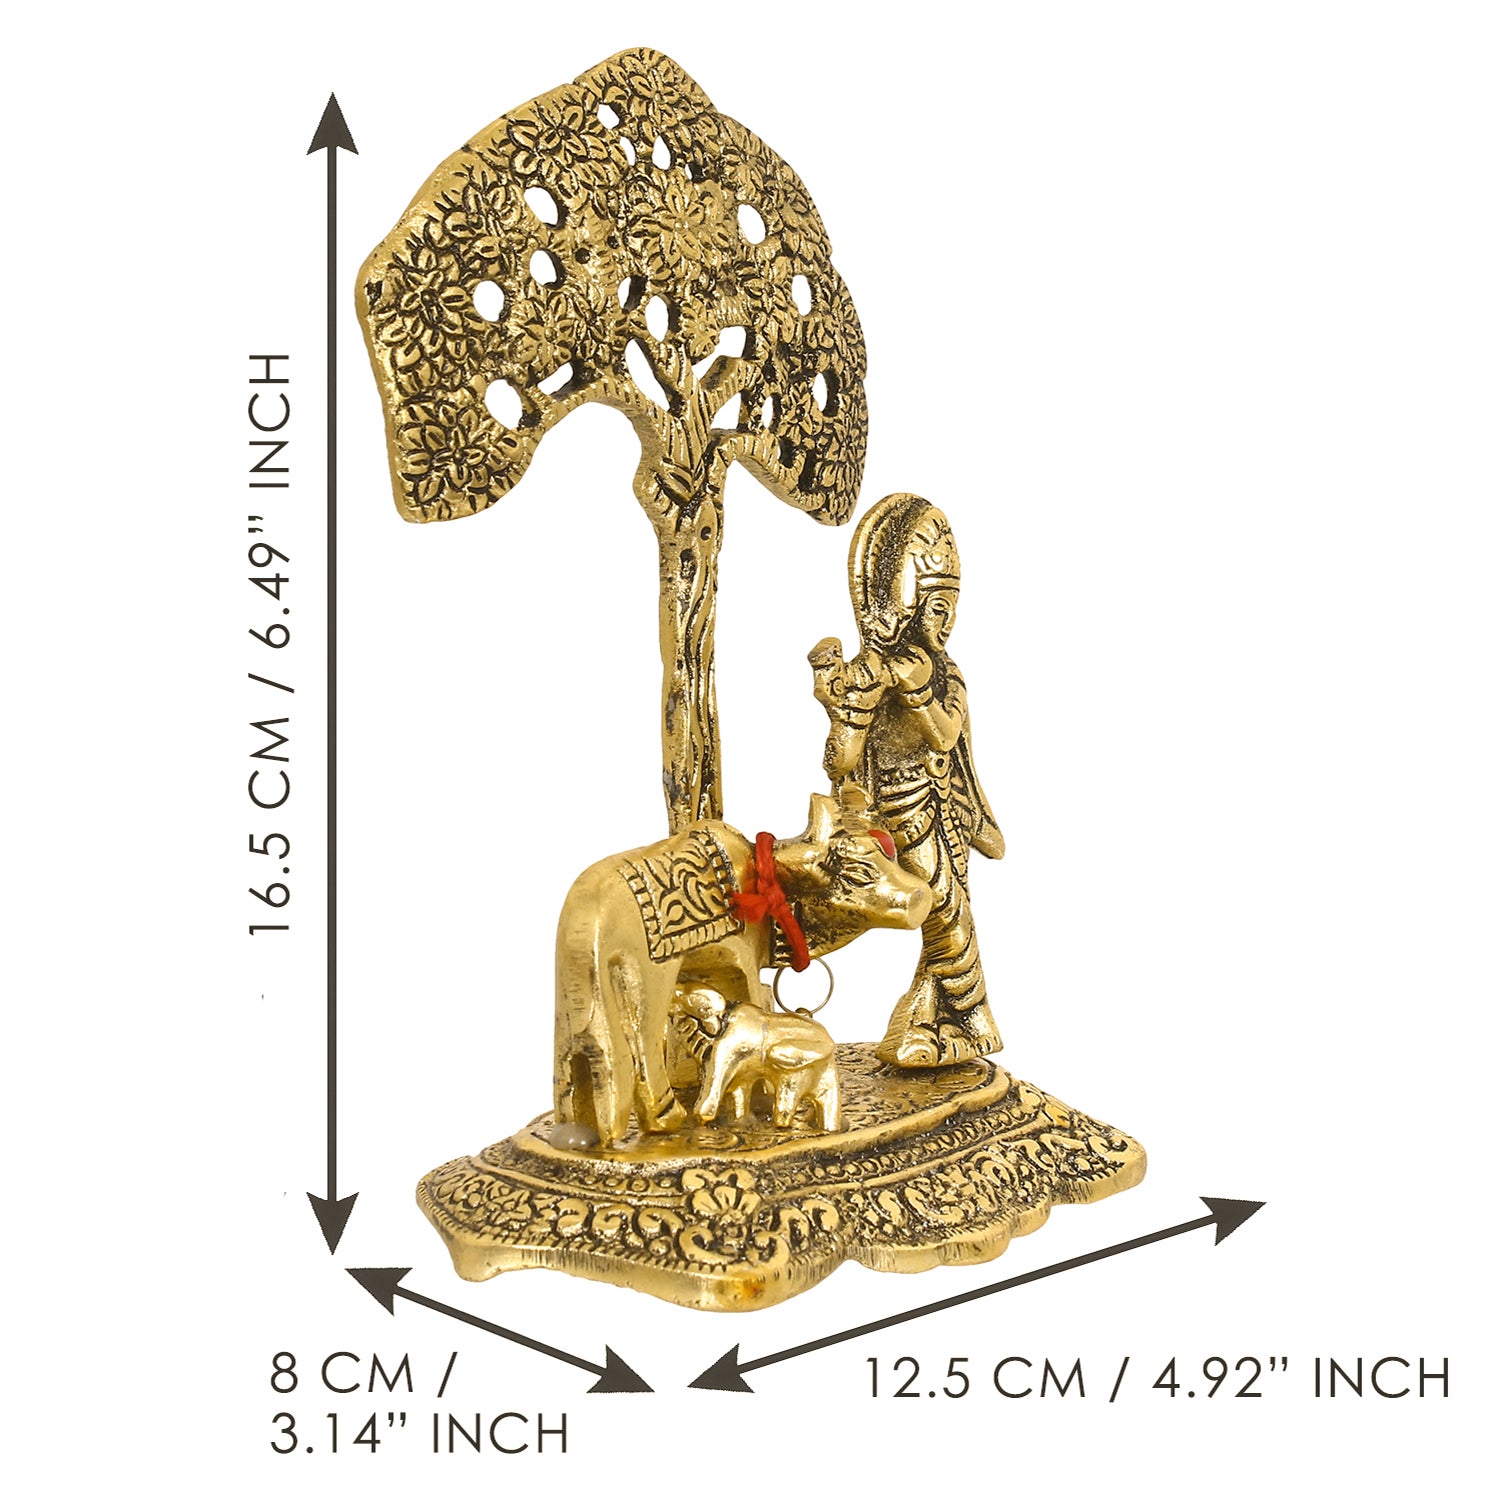 Golden Lord Krishna Idol playing Flute under Tree with Cow and Calf 3